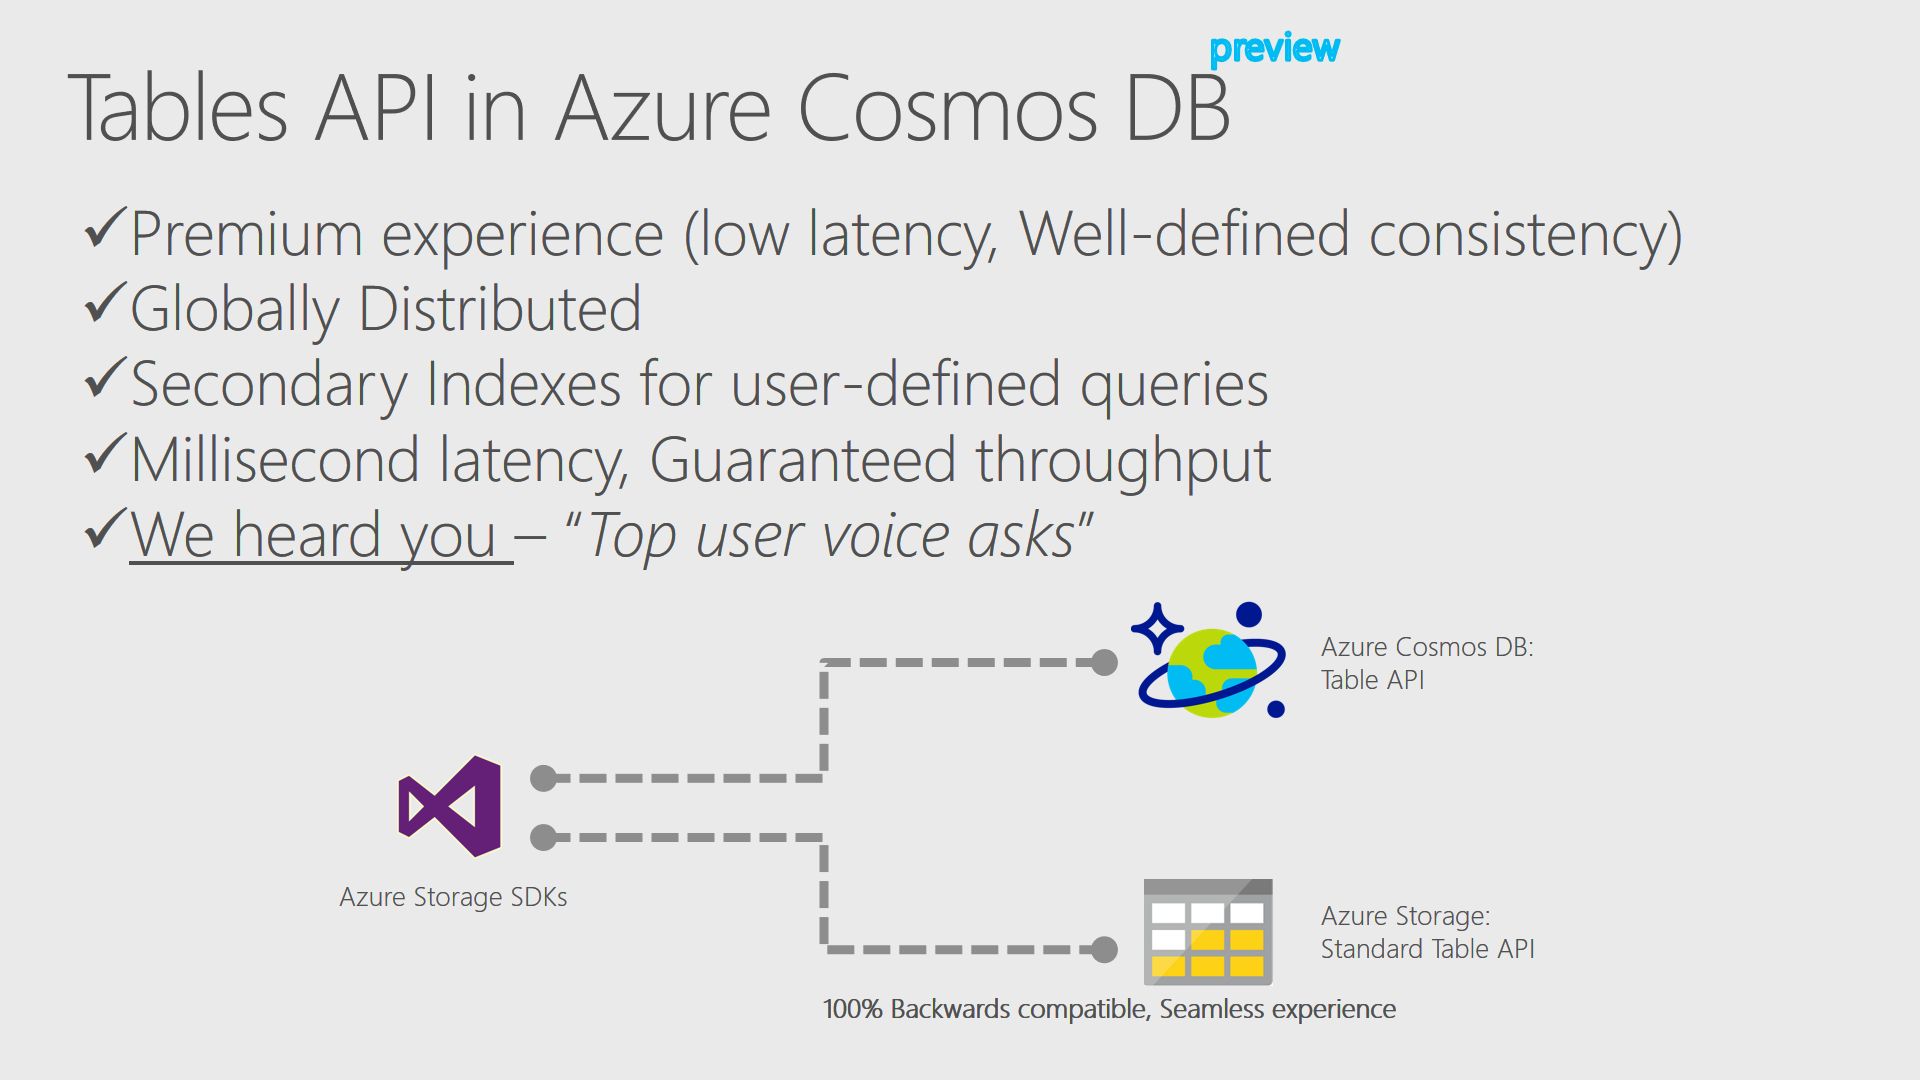 Table API in Azure Cosmos DB